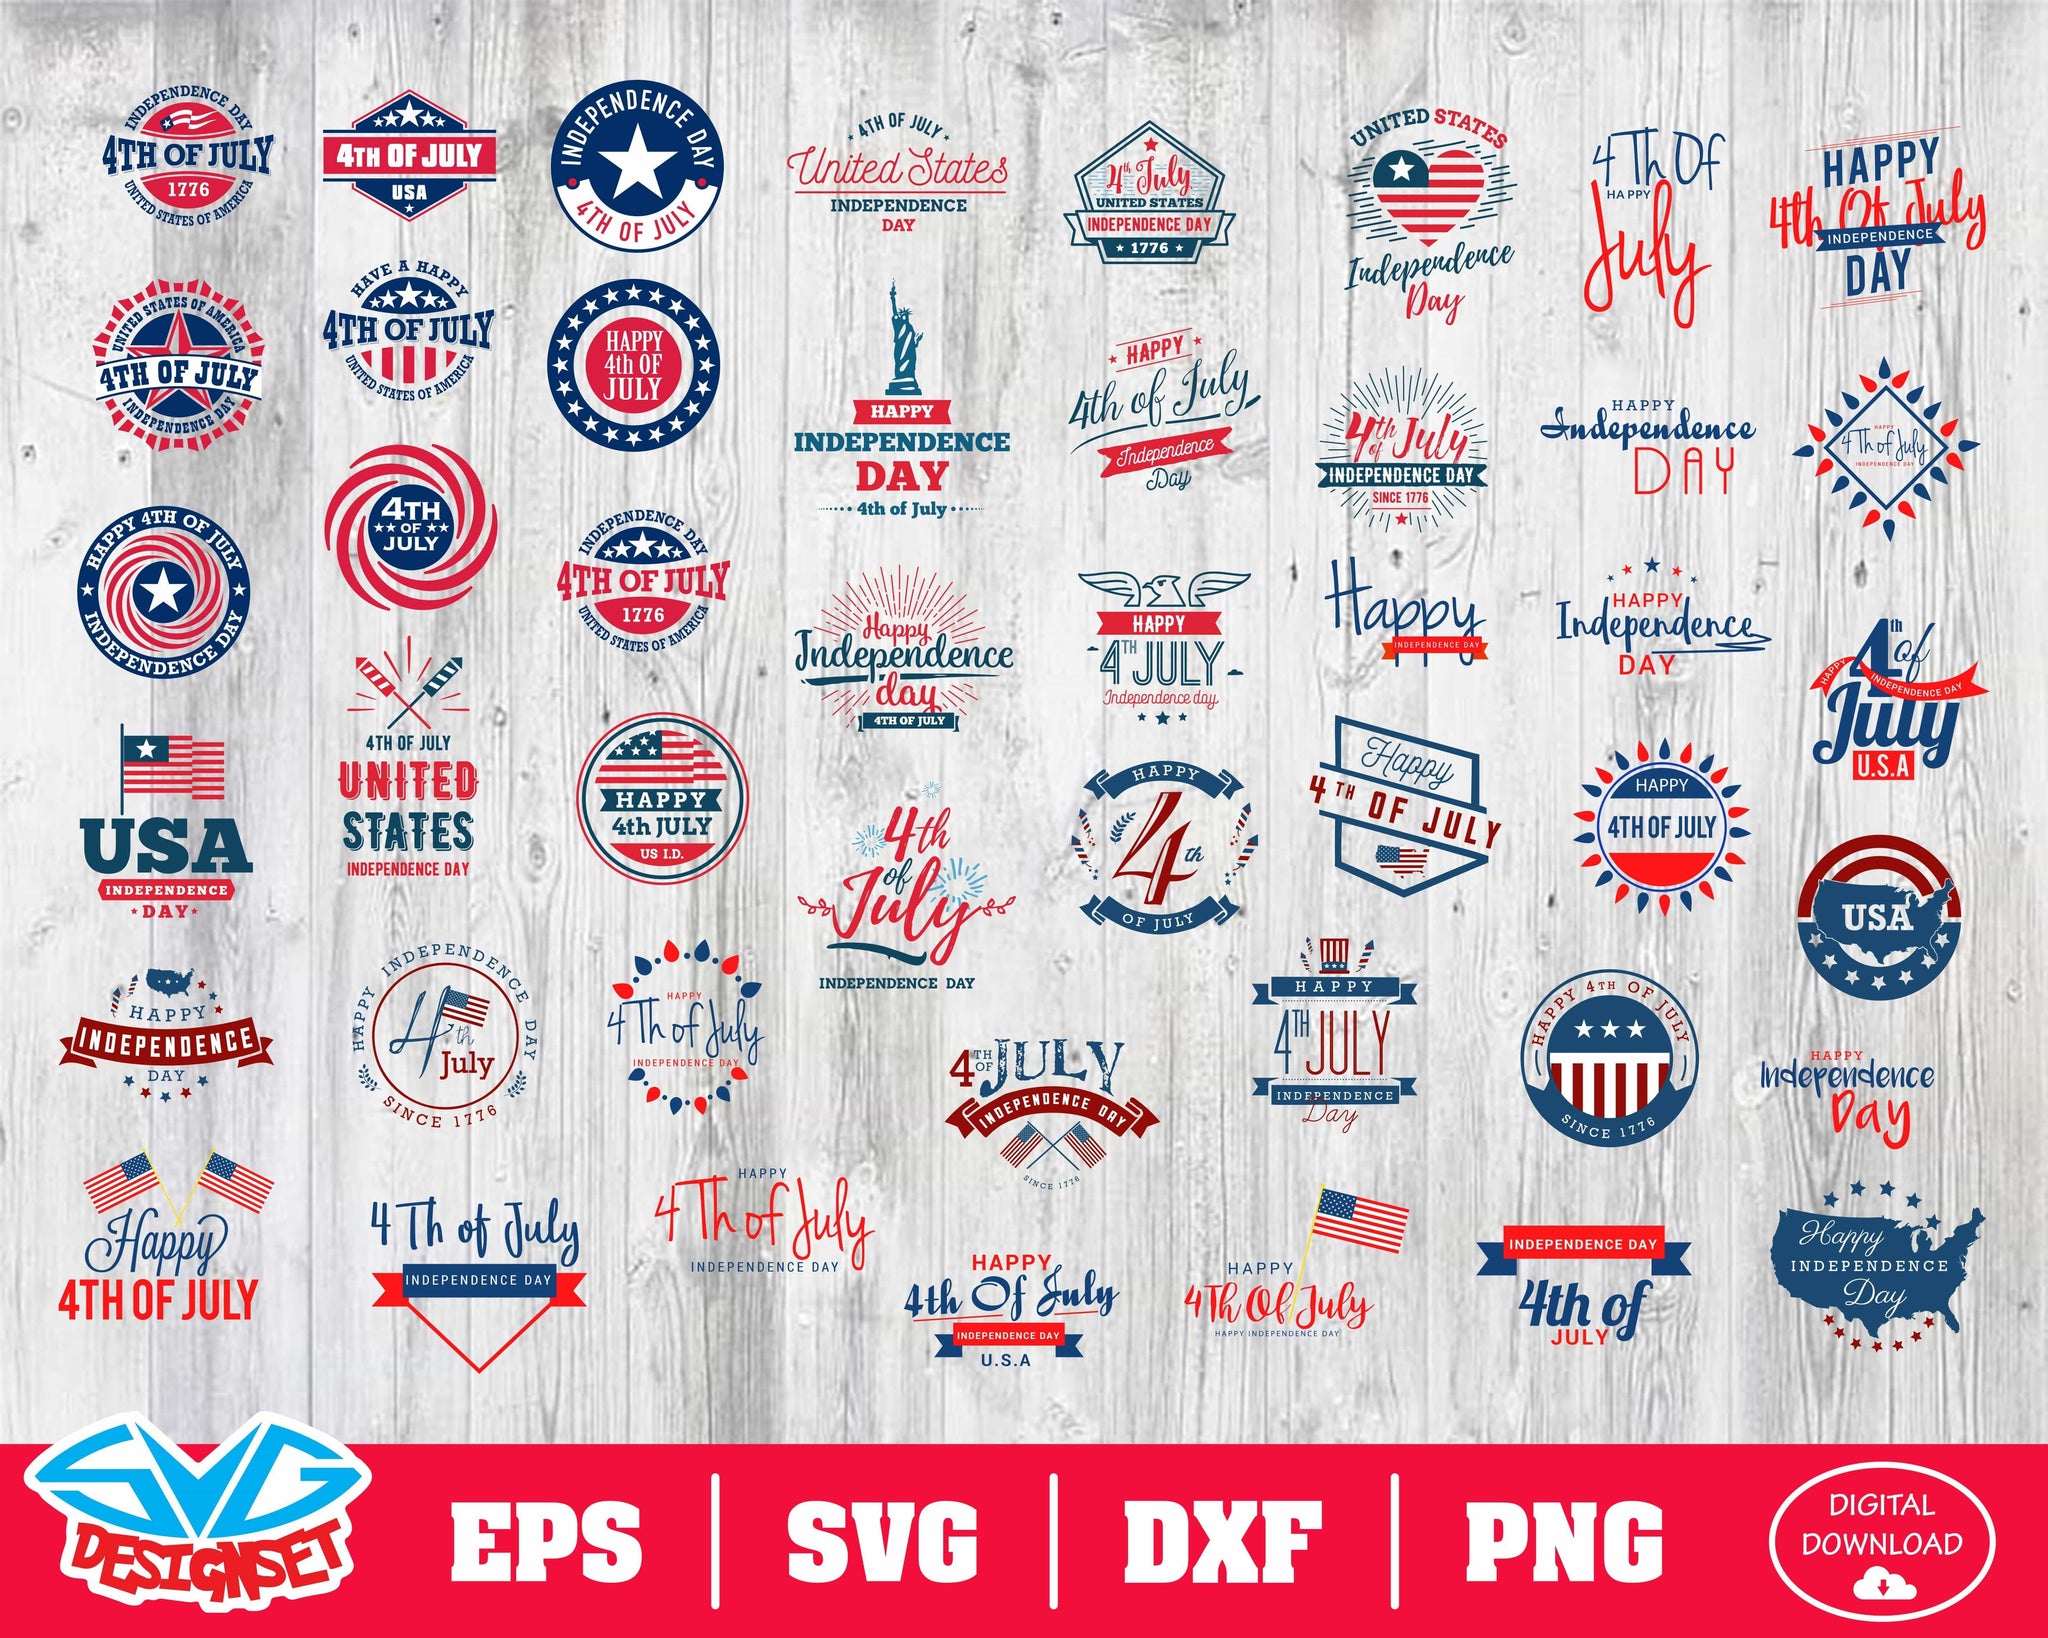 Fourth of July Svg, Dxf, Eps, Png, Clipart, Silhouette and Cutfiles #1 - SVGDesignSets